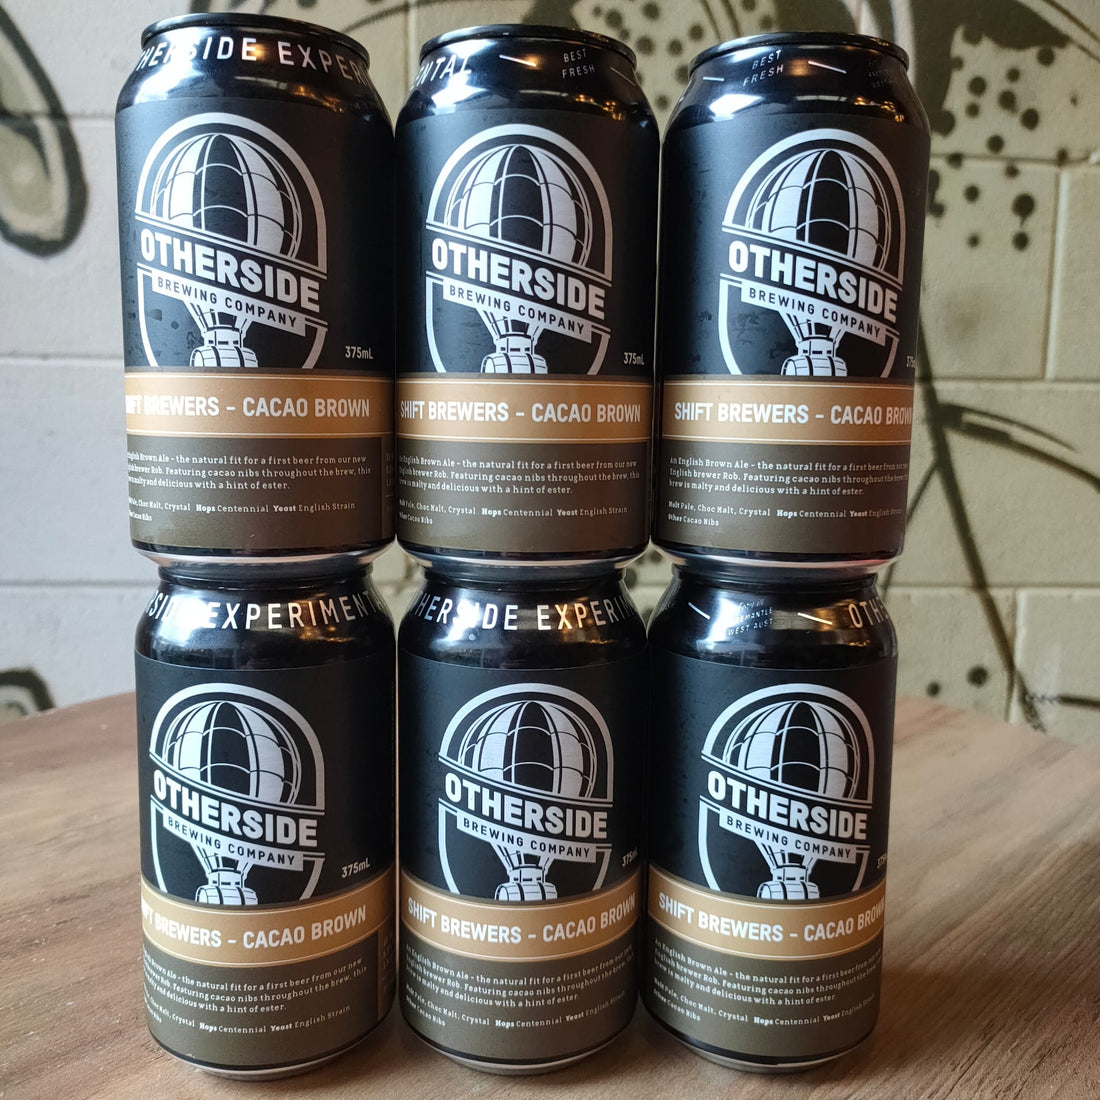 Otherside / Shift Brewer: Cacao Brown Ale - 5.5% 355ml 6 Pack